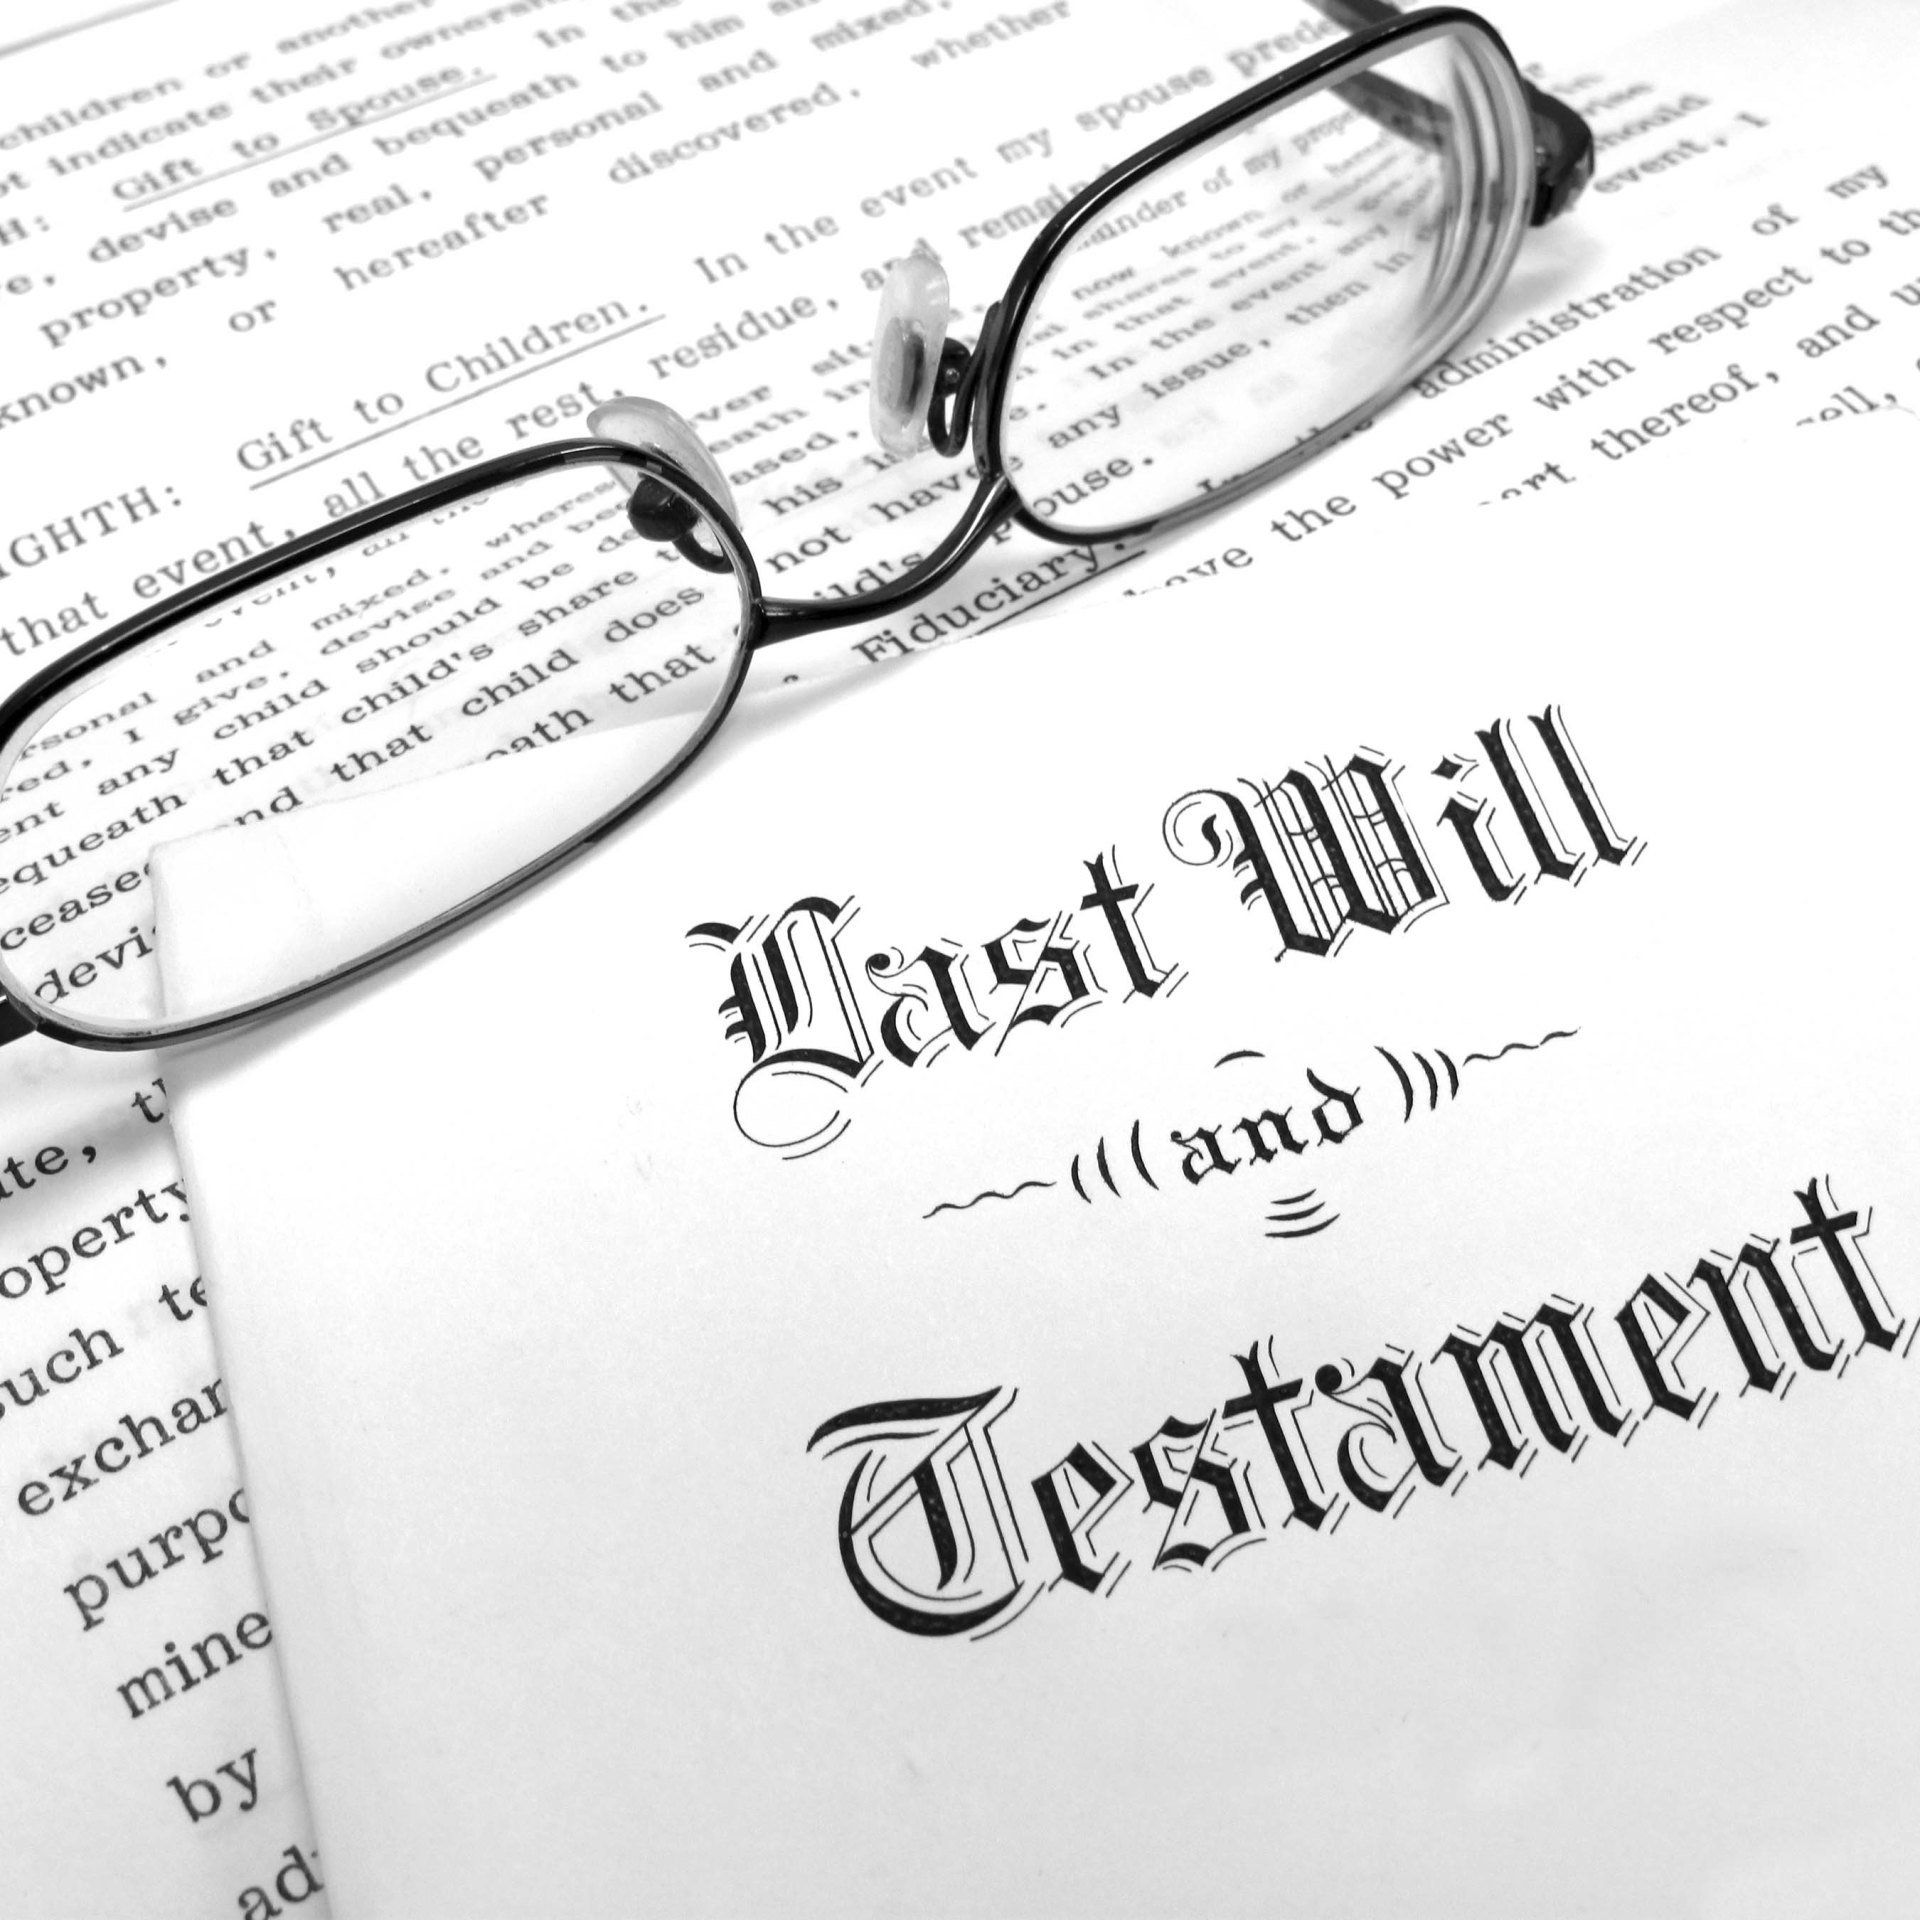 Last will and testament — Probate Law Services in Springfield, MA